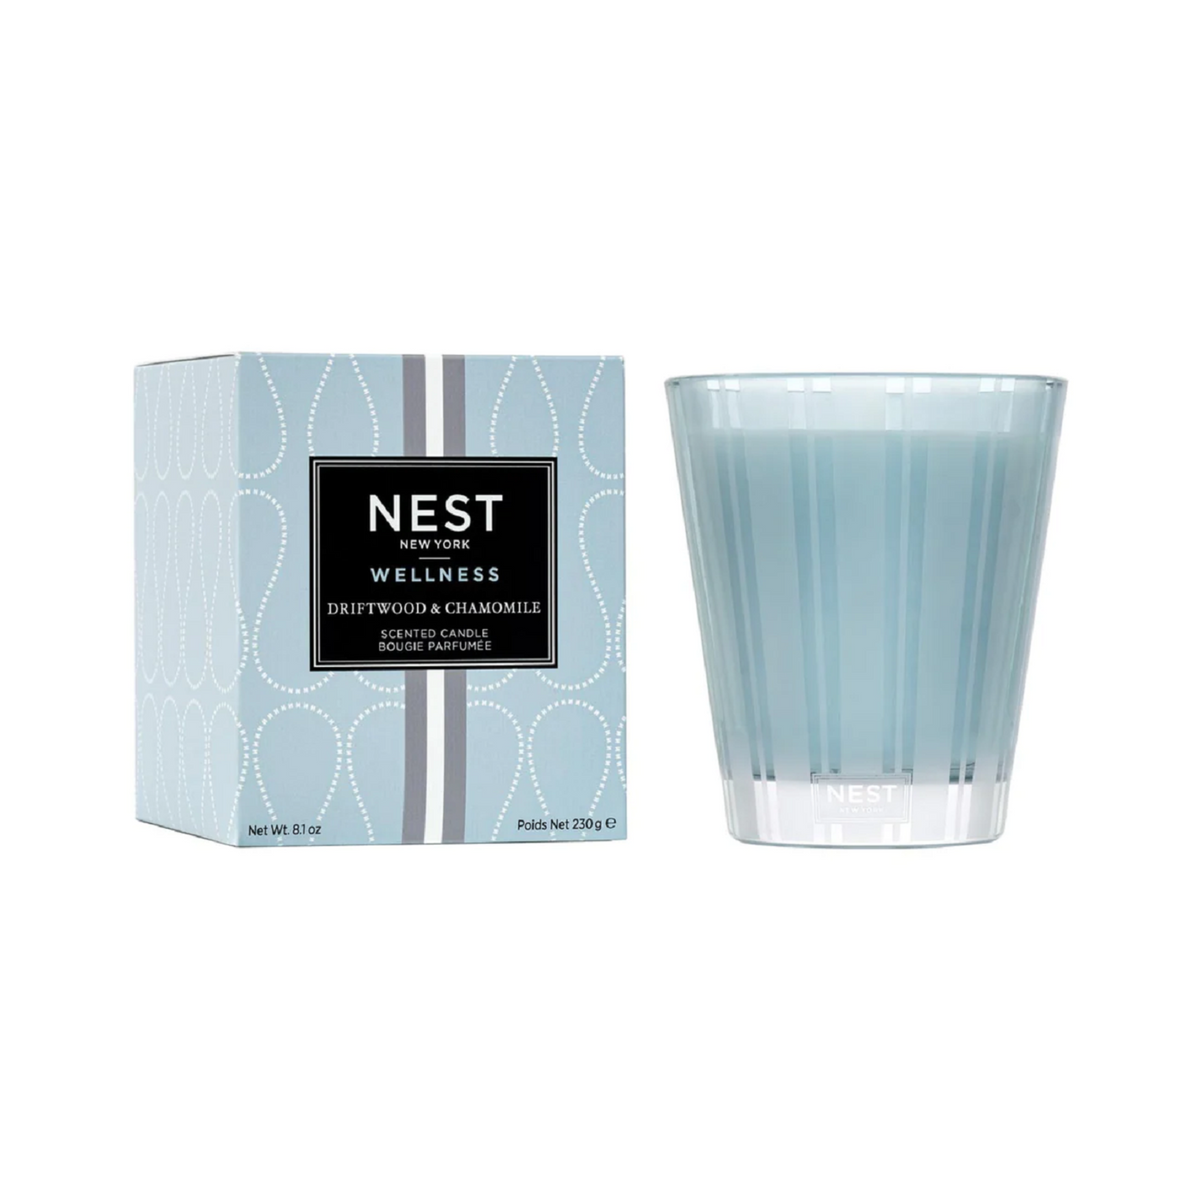 Product Image of Nest New York  Driftwood and Chamomile Classic Candle with Box